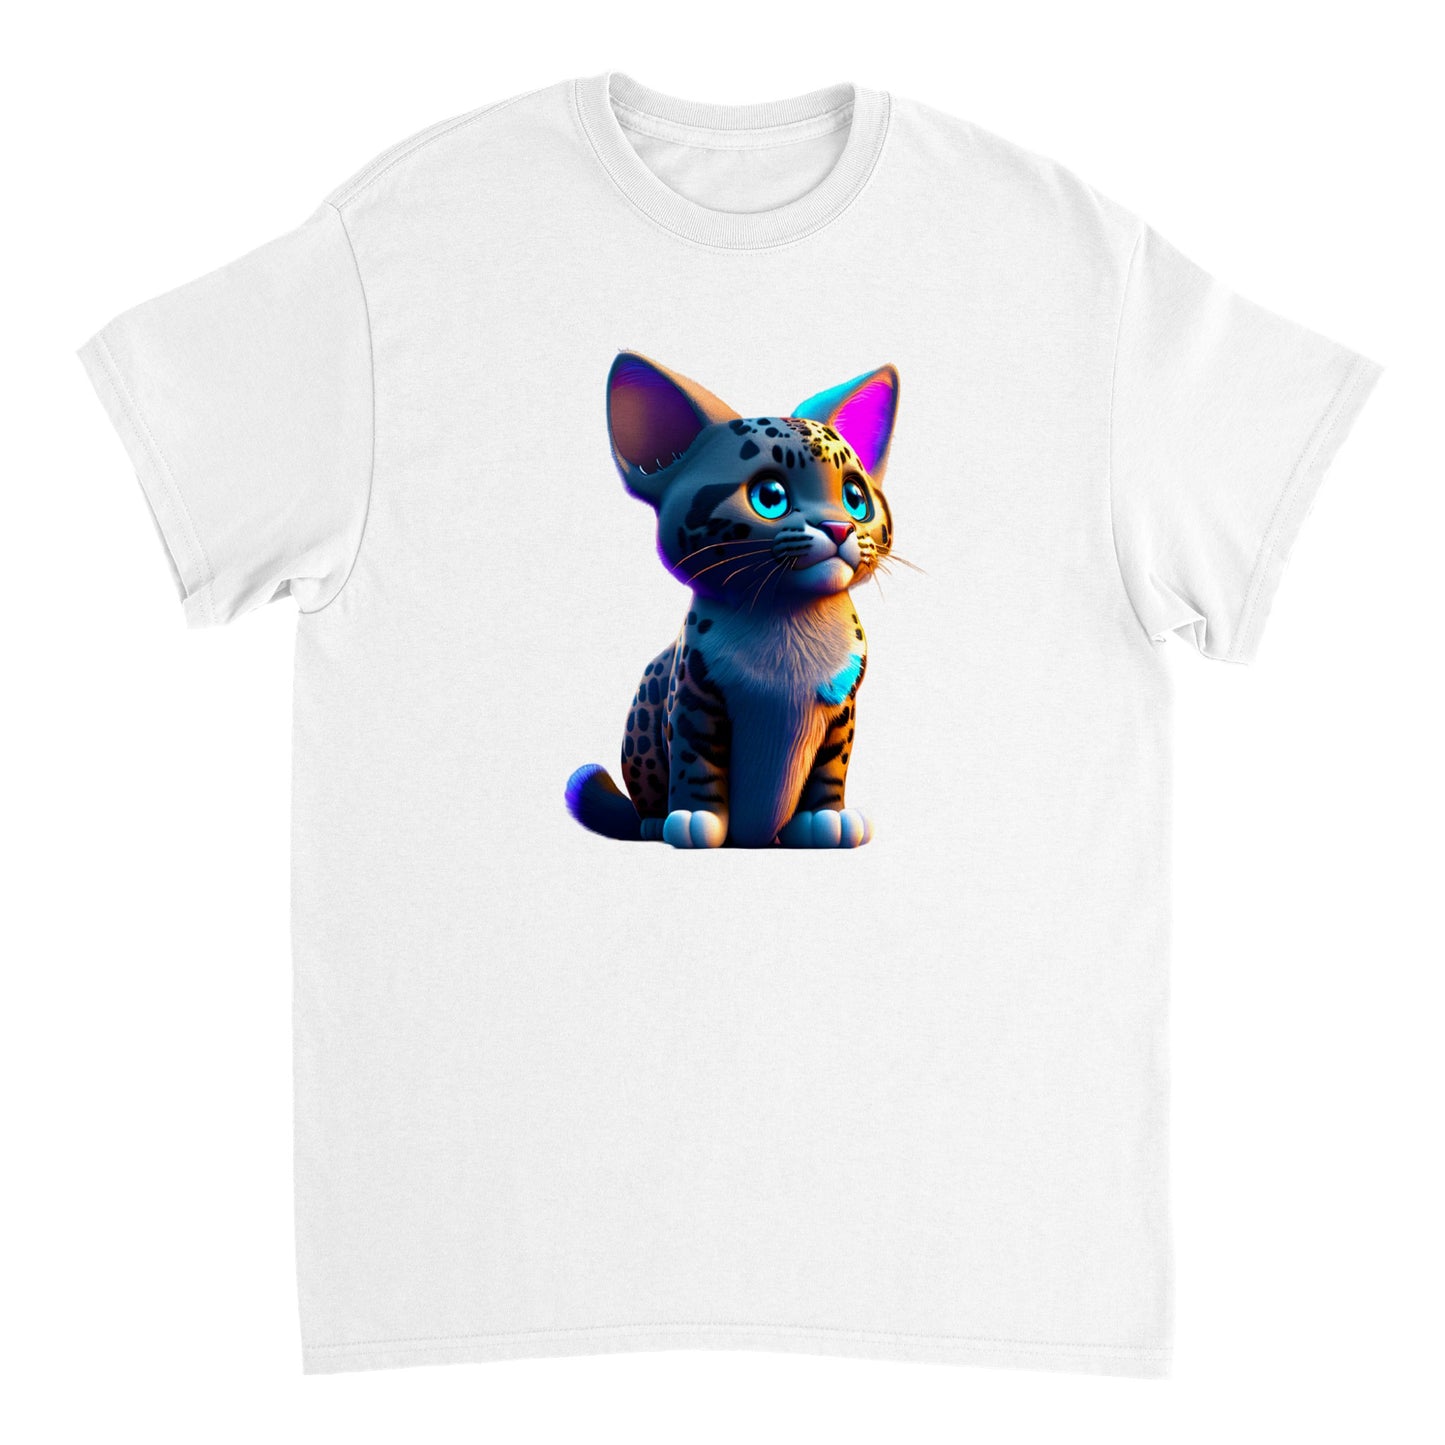 Adorable, Cool, Cute Cats and Kittens Toy - Heavyweight Unisex Crewneck T-shirt 37